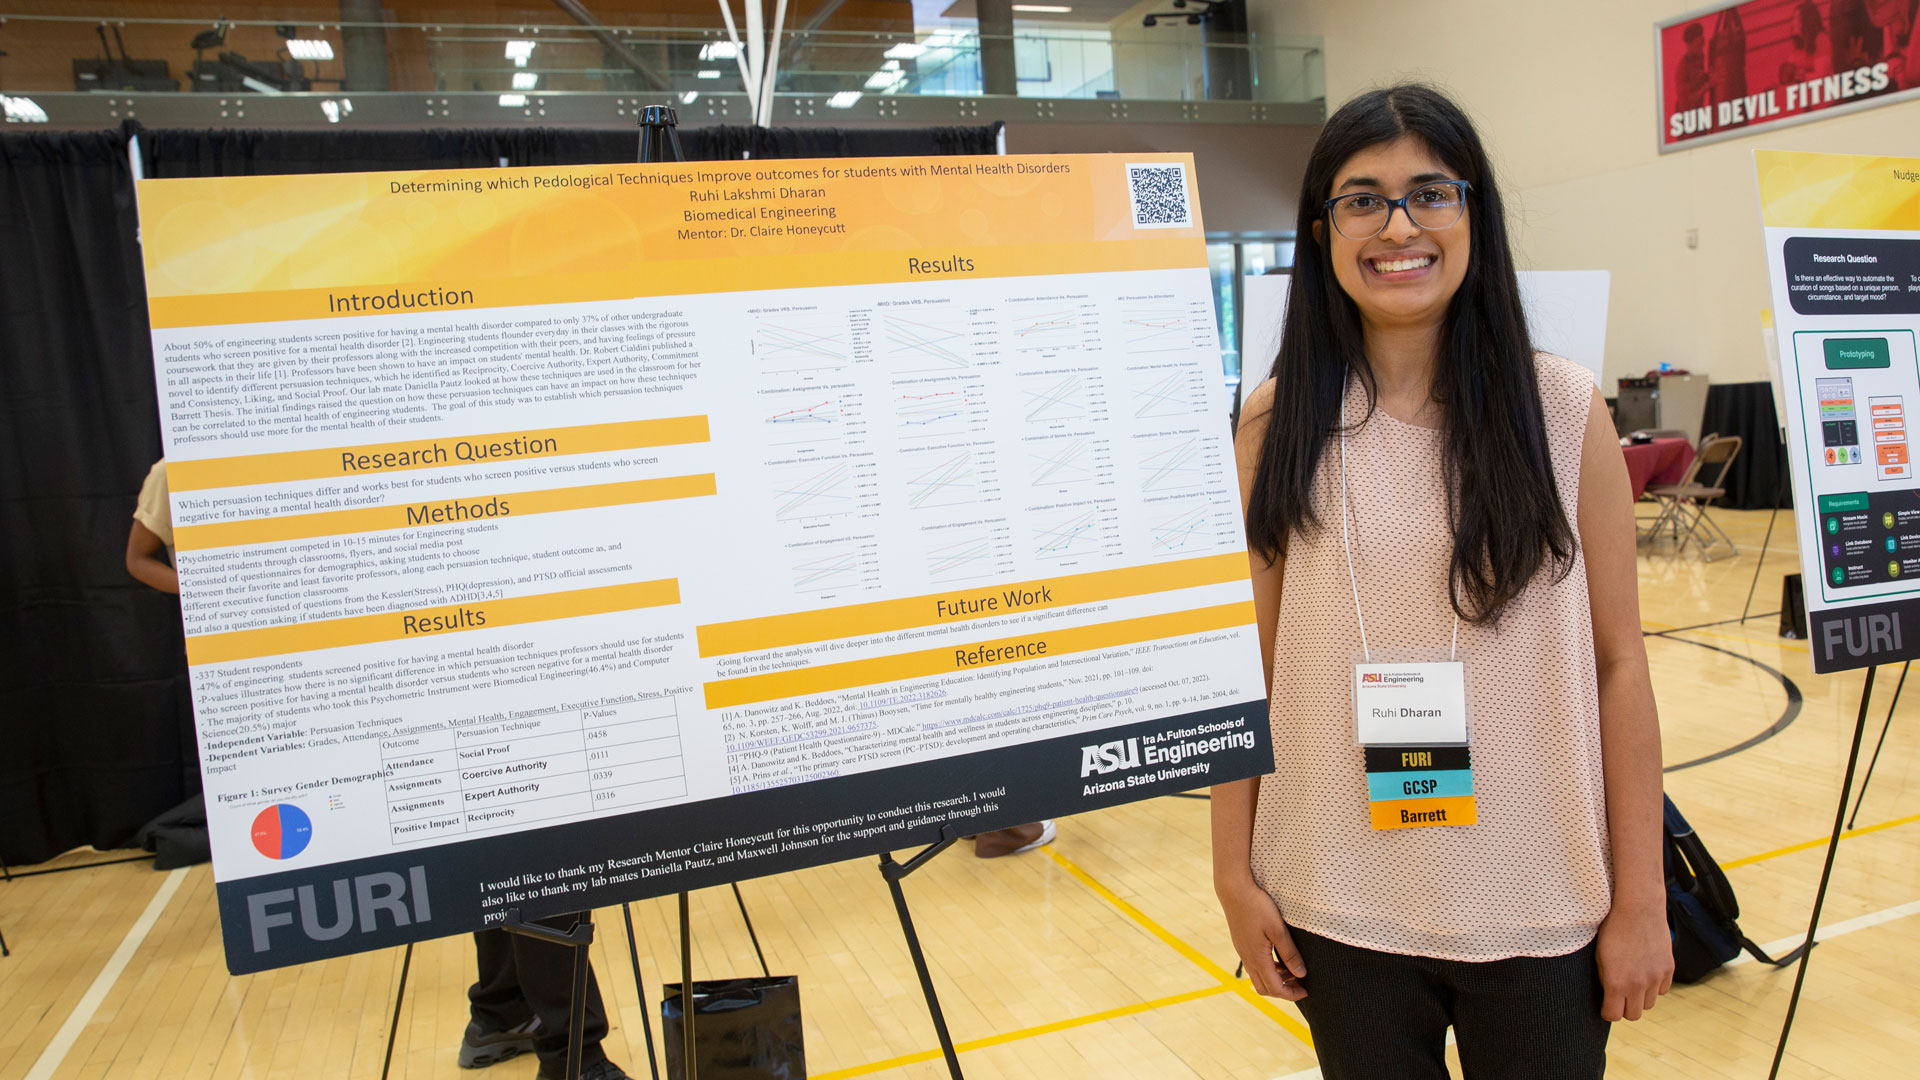 ASU biomedical engineering undergraduate student Ruhi Dharan poses with a research poster presenting her Fulton Undergraduate Research Initiative project findings.